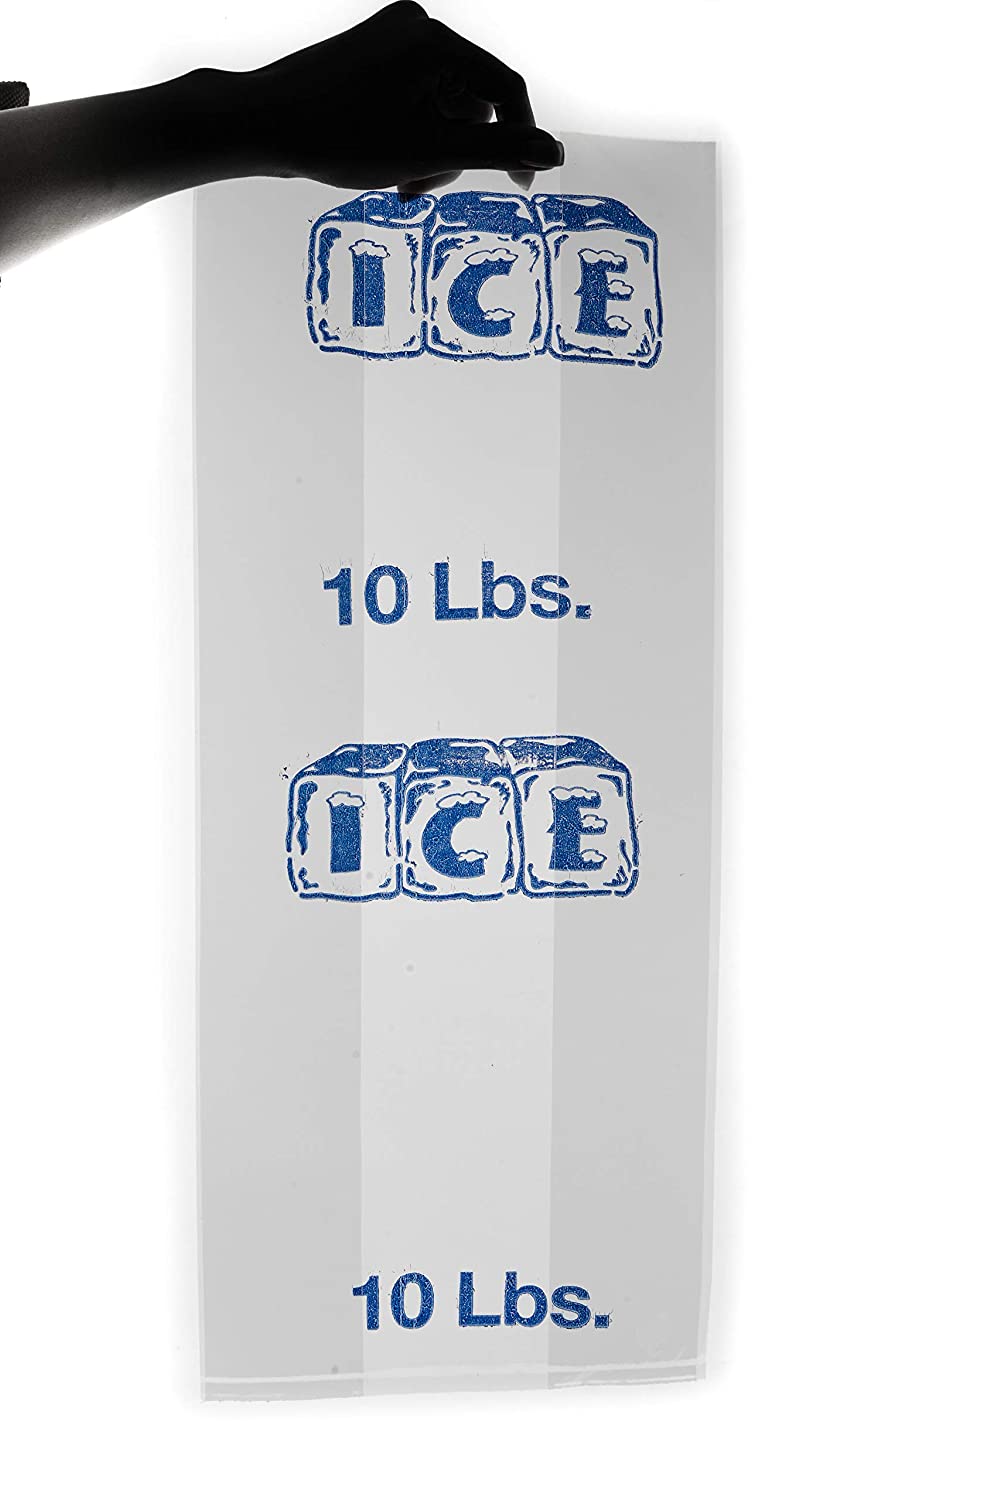 Heavy Duty  ice cube bag  Restaurants  Bars  Bodega's  Home  no ripping & tearing  strength and puncture resistance  Food Commercial Grade  10 pound lb weight capacity  Restaurant Supplies  Plastic Bags for ice  plastic bag  Kitchen supplies  Ice containers  ice bag  Food Service